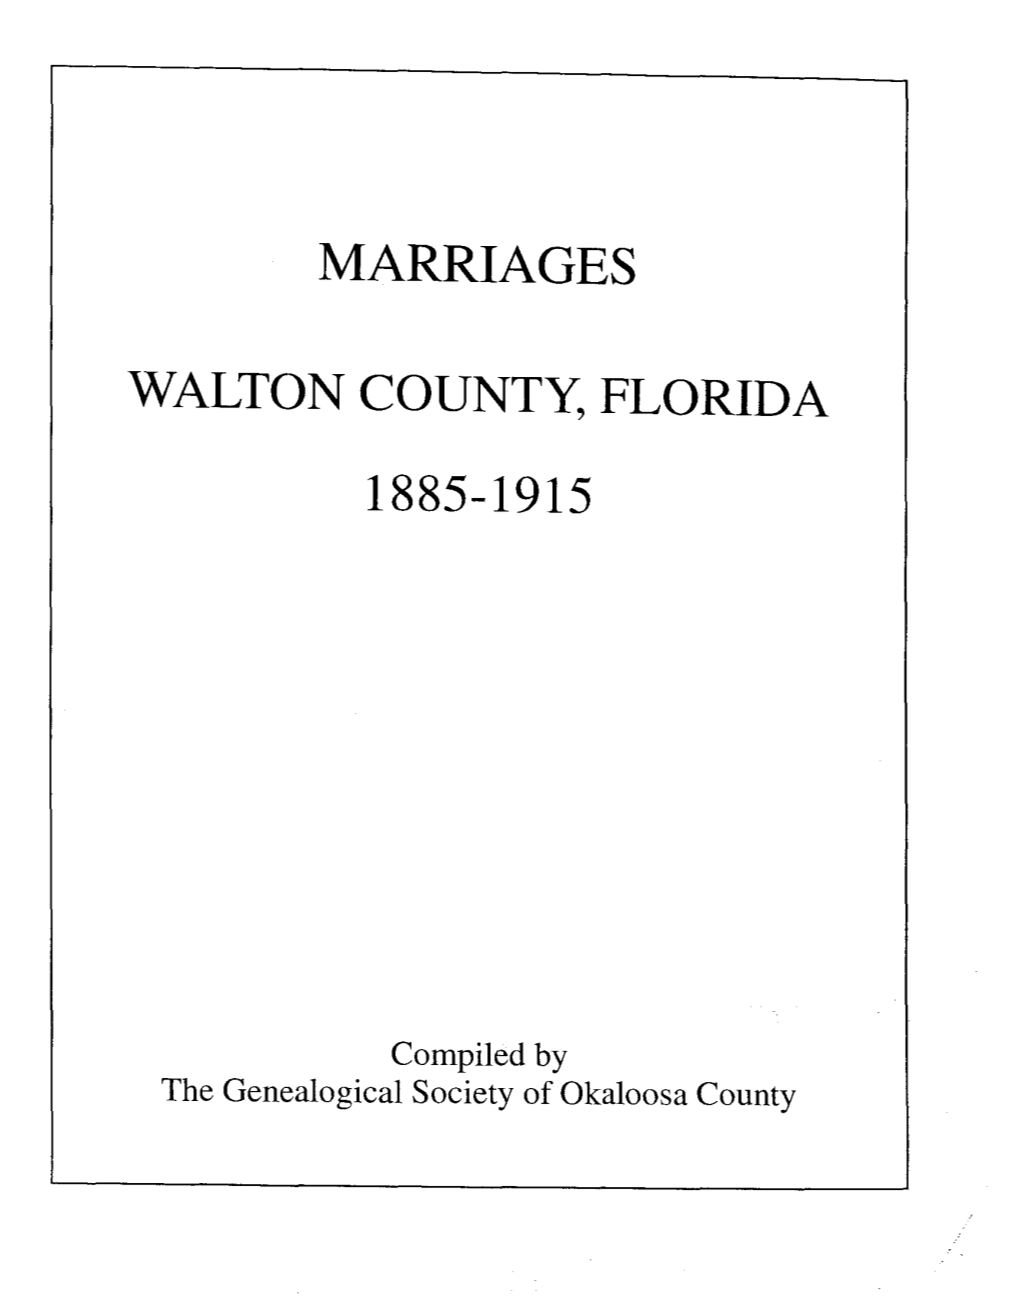 Walton County Marriages, 1885-1915